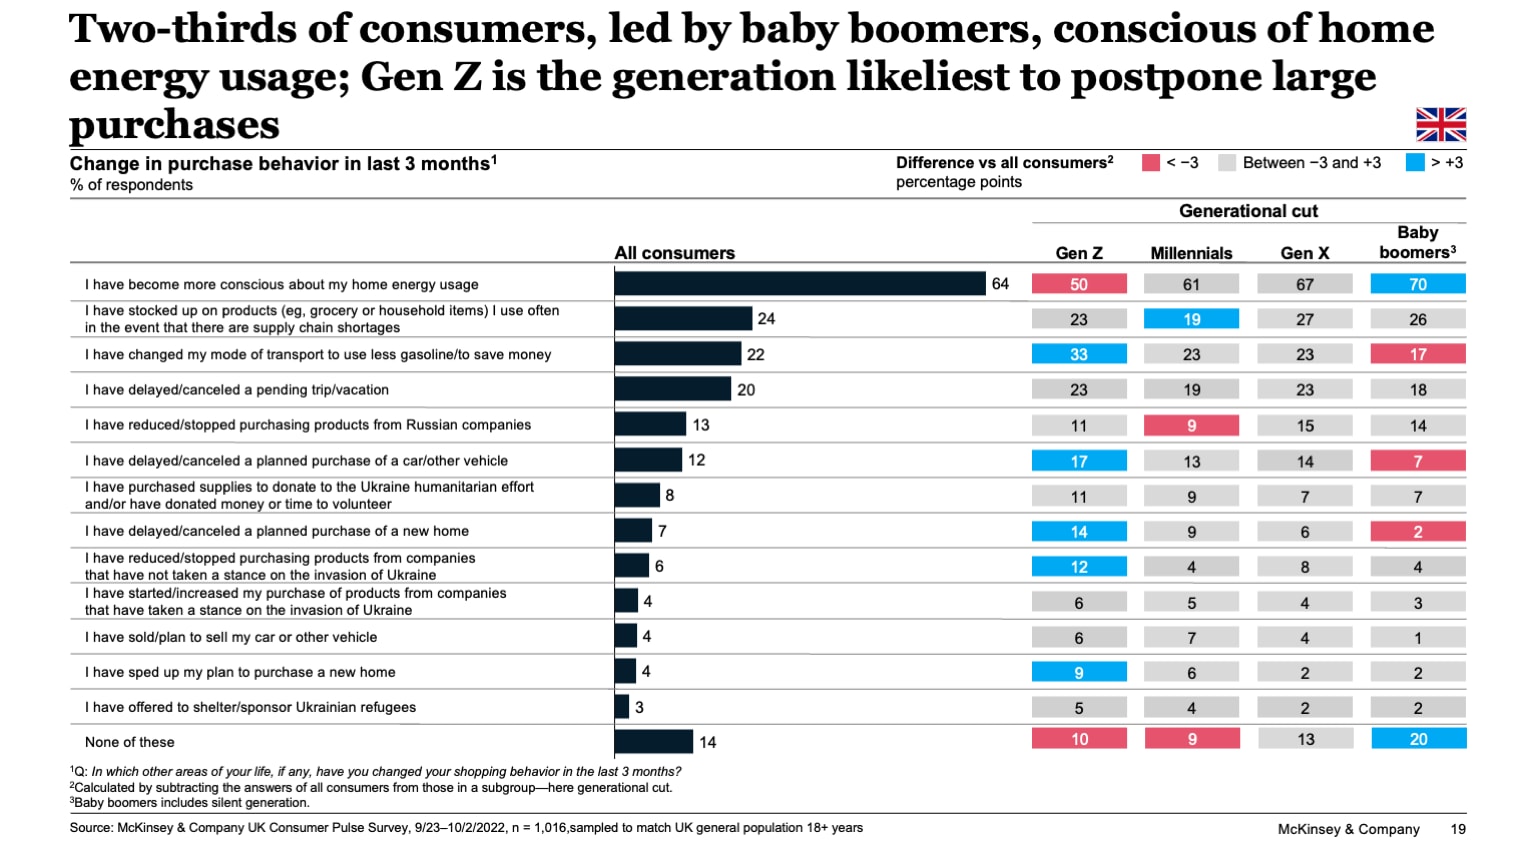 Two-thirds of consumers, led by baby boomers, conscious of home energy usage; Gen Z is the generation likeliest to postpone large purchases